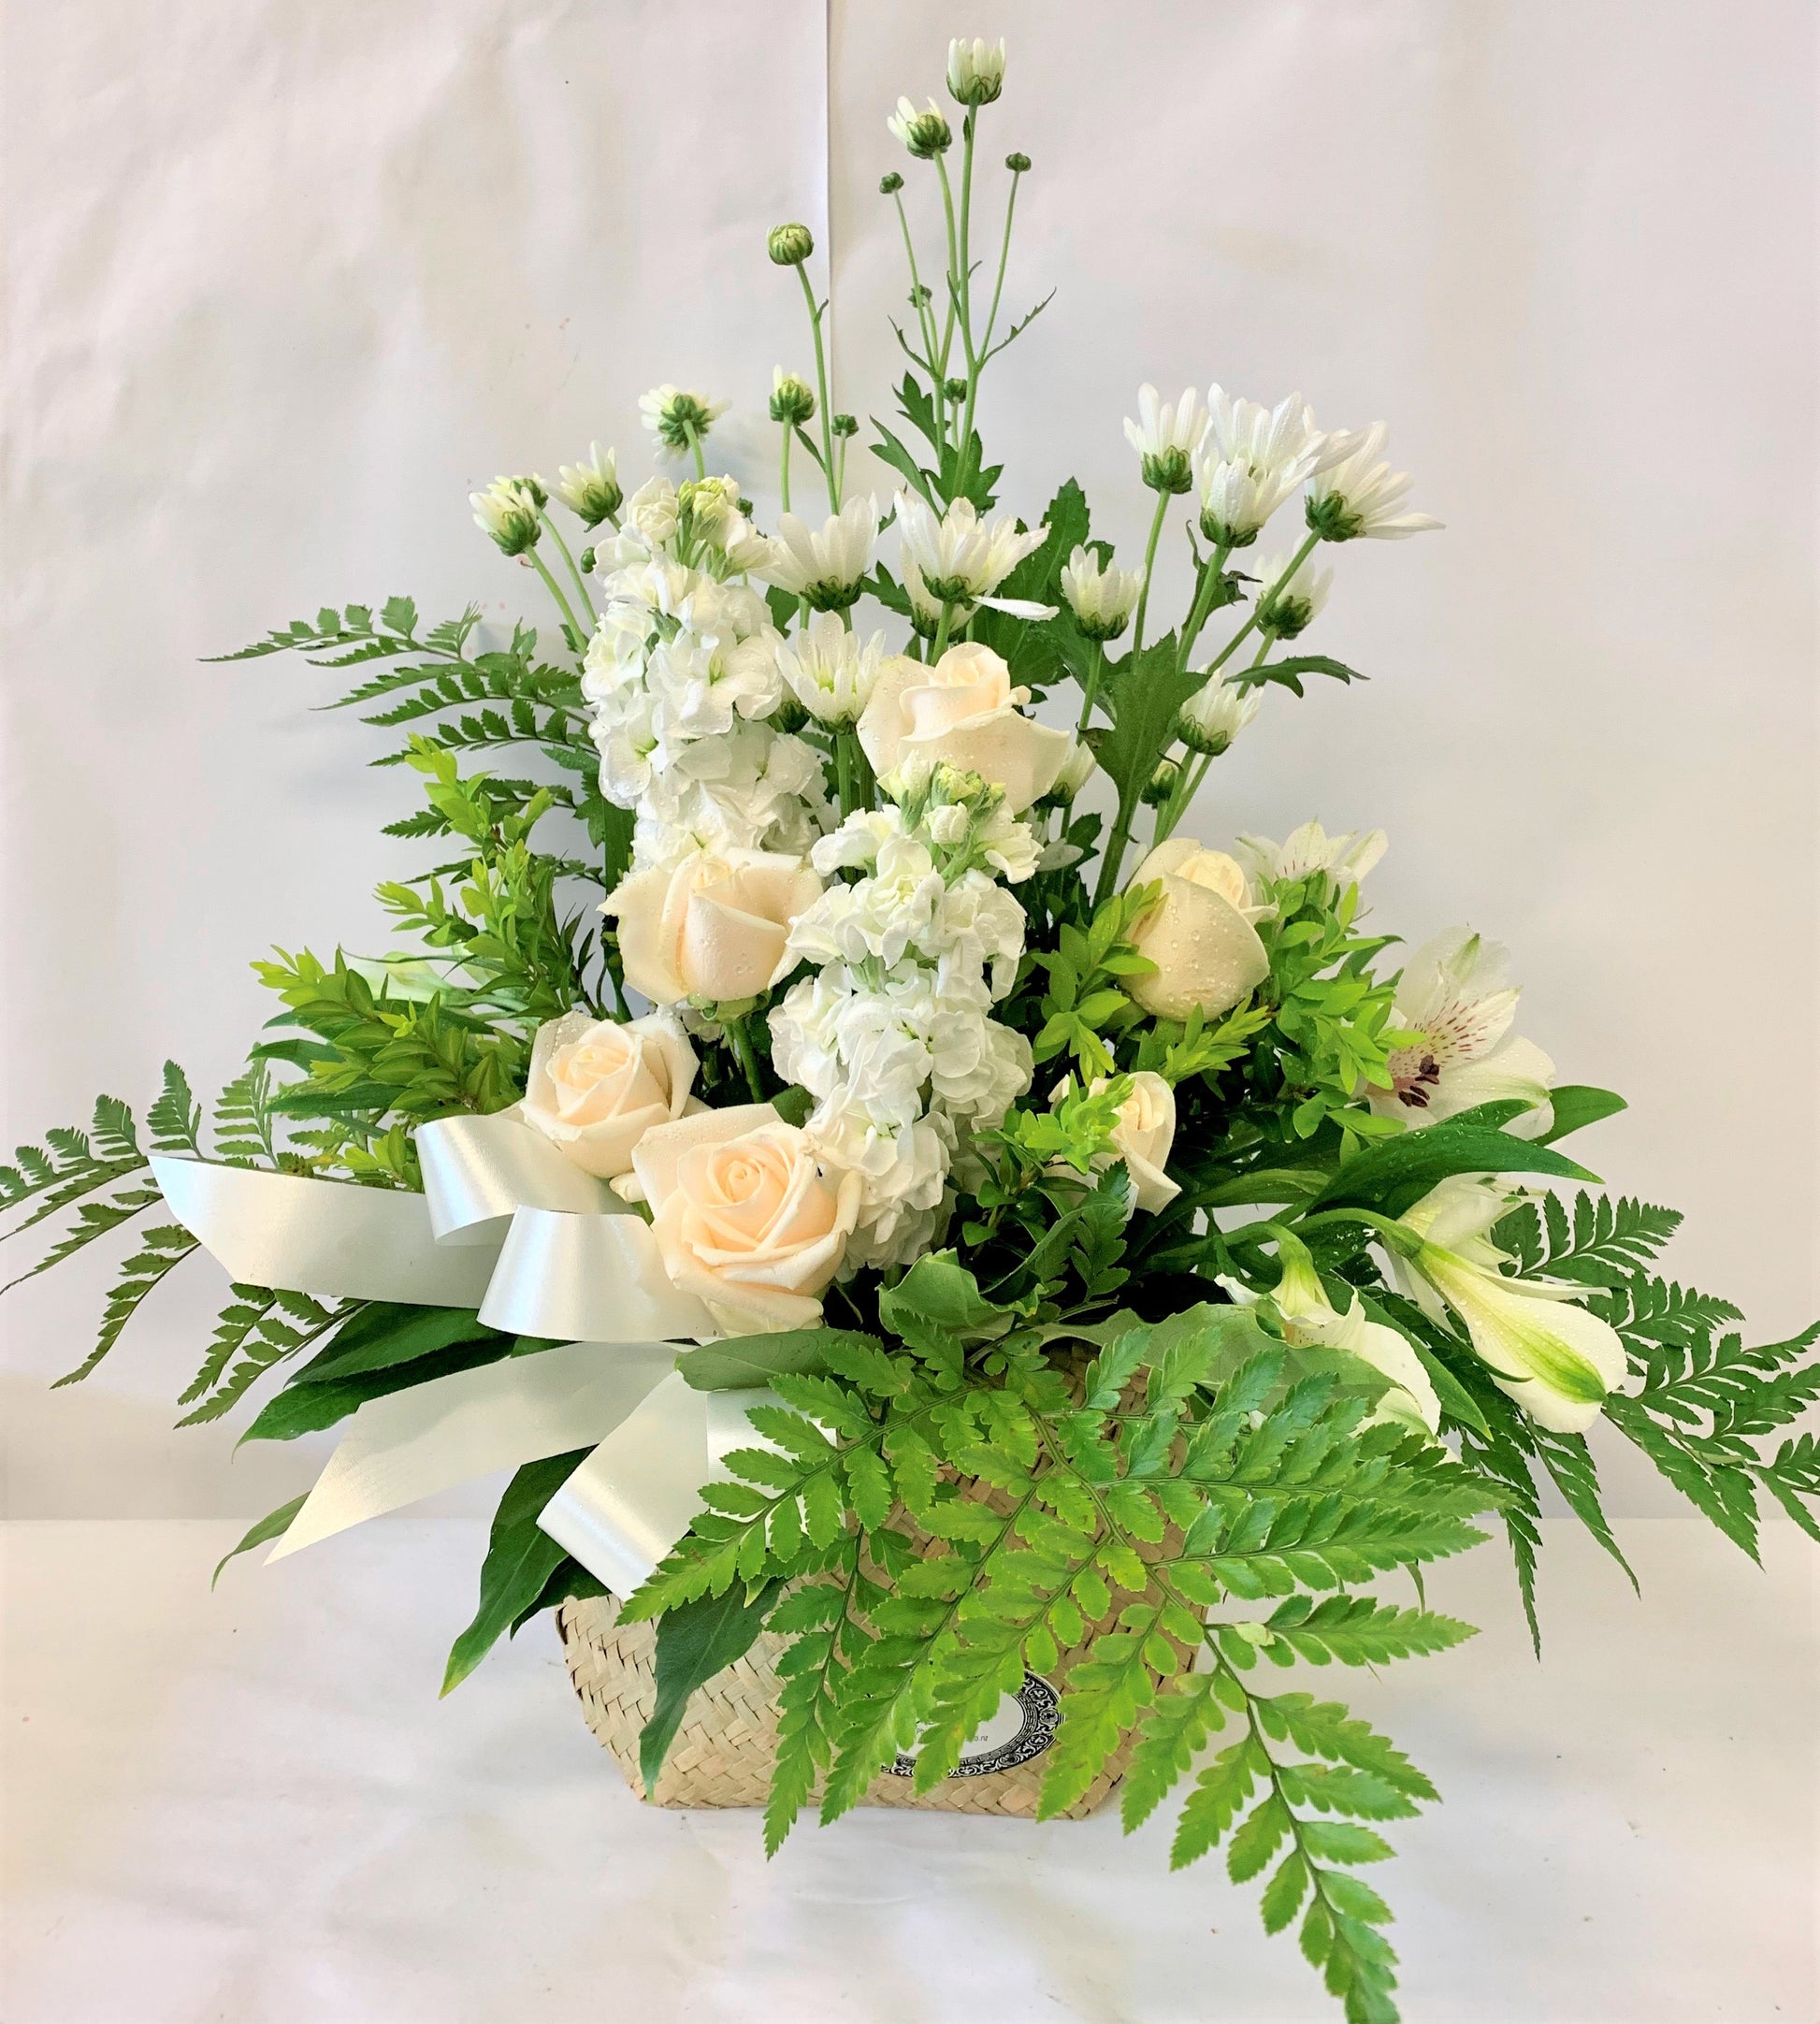 Sympathy flowers with native ferns and stock roses, whanua gift or sympathy gift